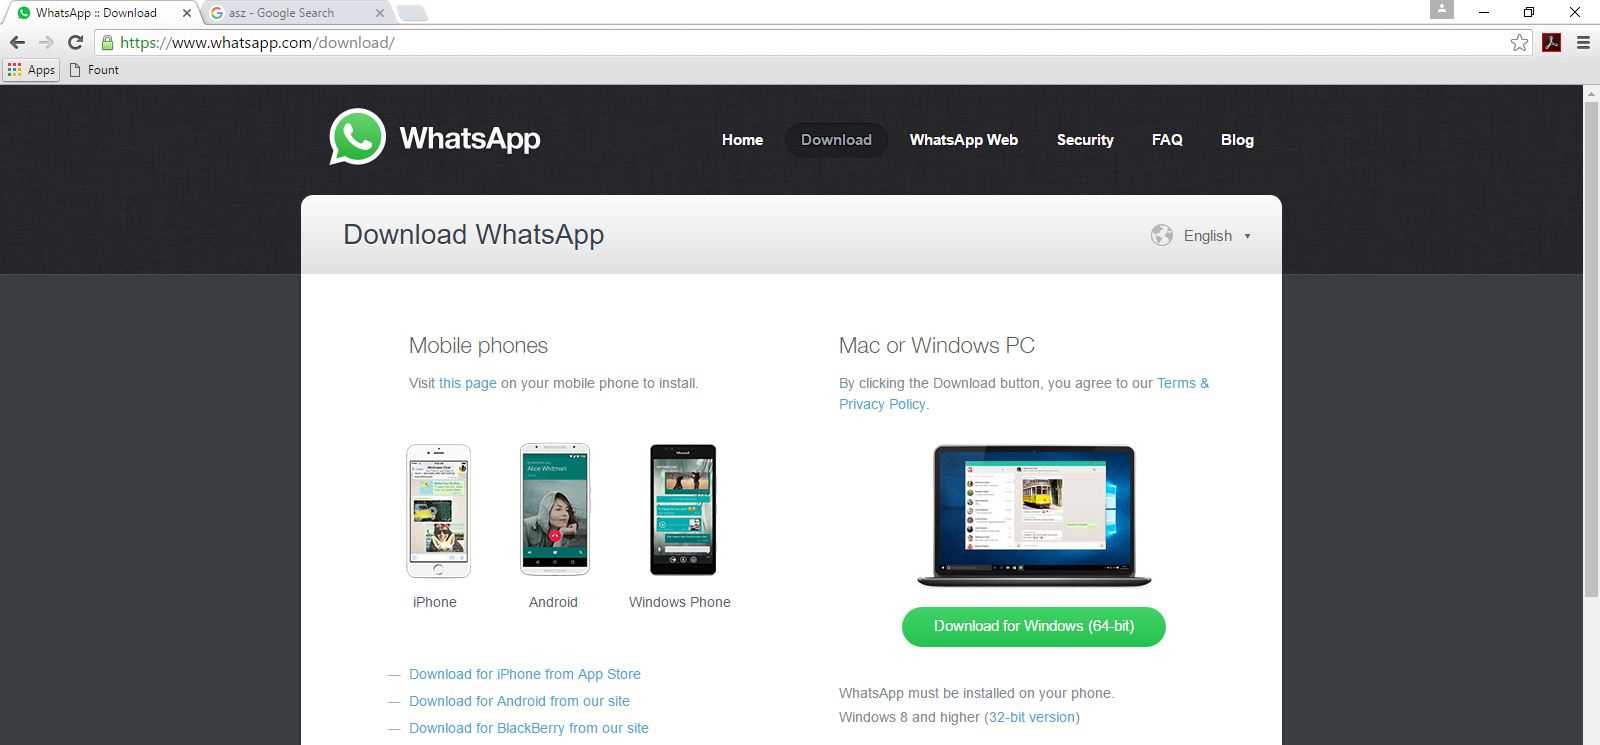 Whatsapp Download Now Available on Windows PC